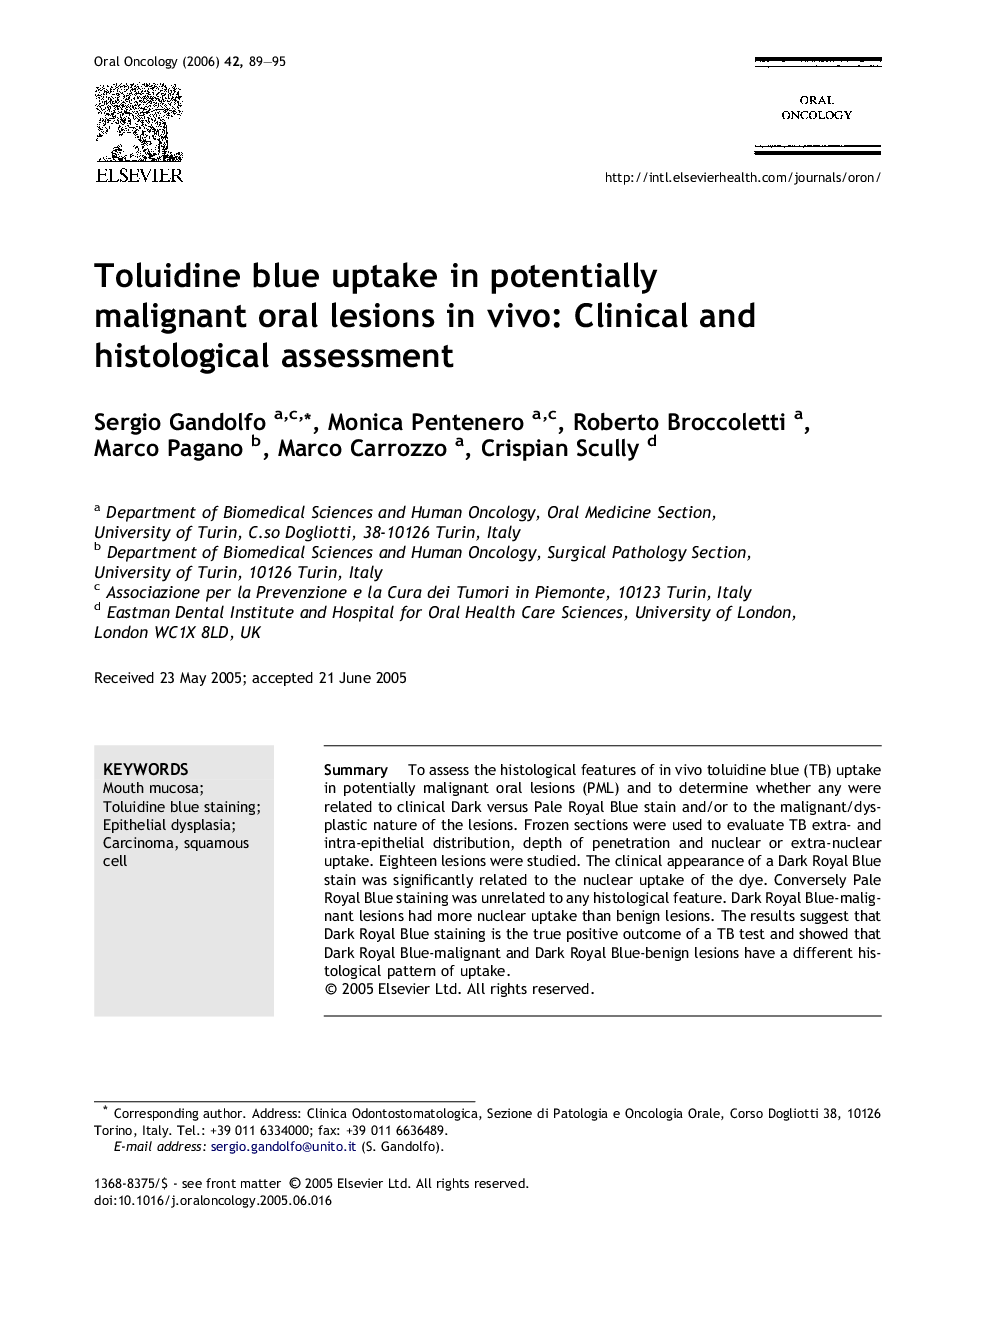 Toluidine blue uptake in potentially malignant oral lesions in vivo: Clinical and histological assessment